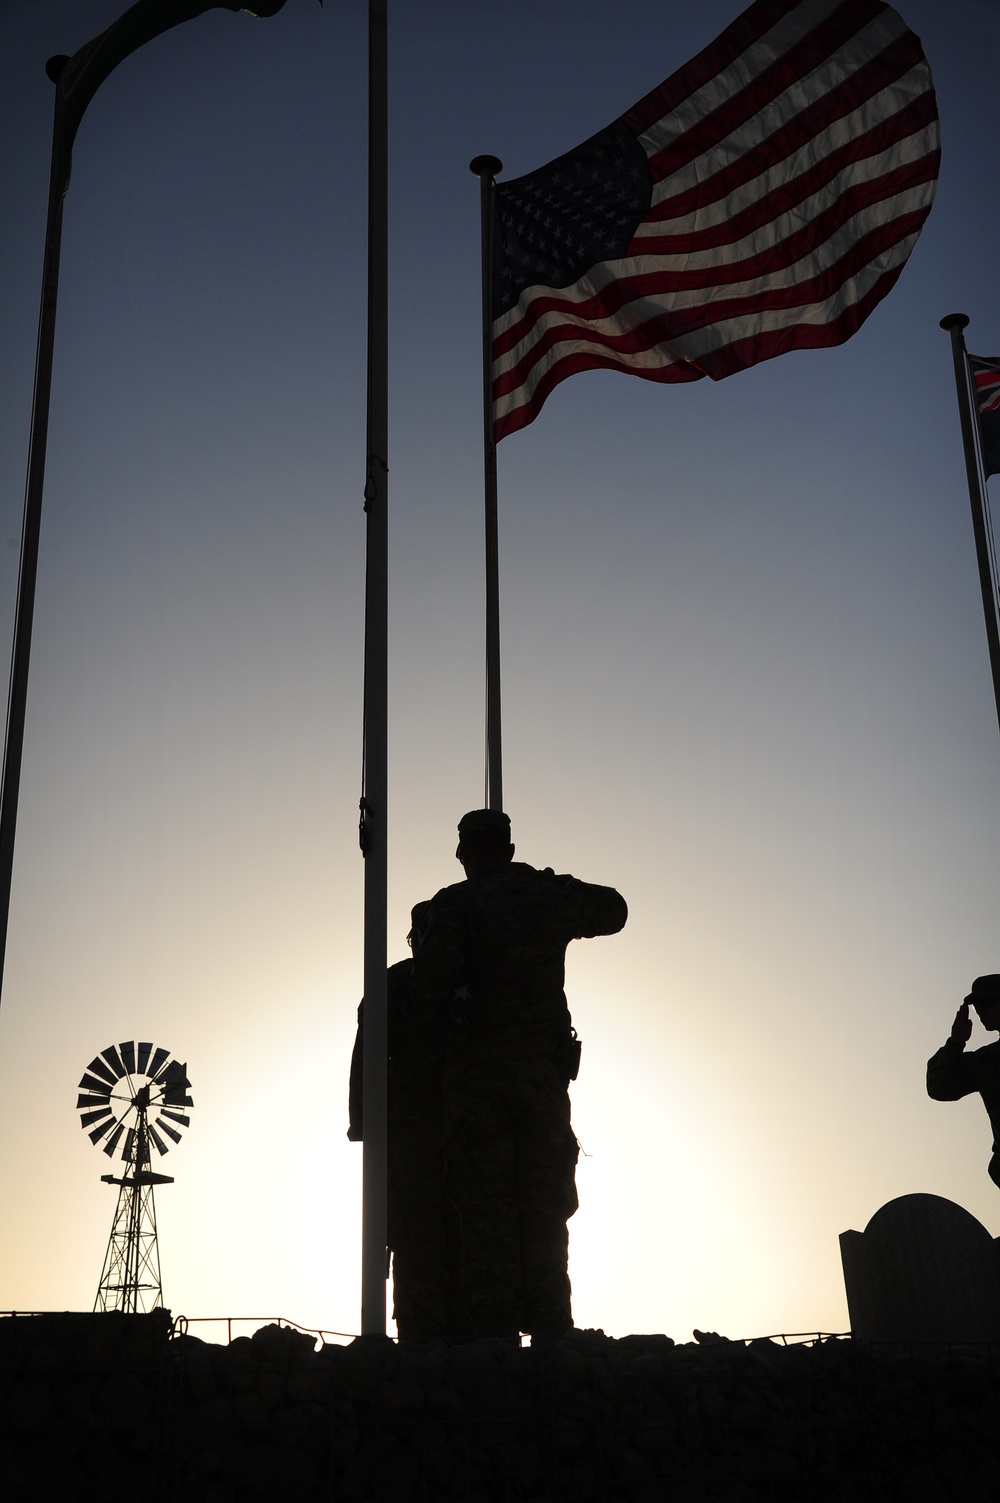 Soldiers raise American flag at coalition base